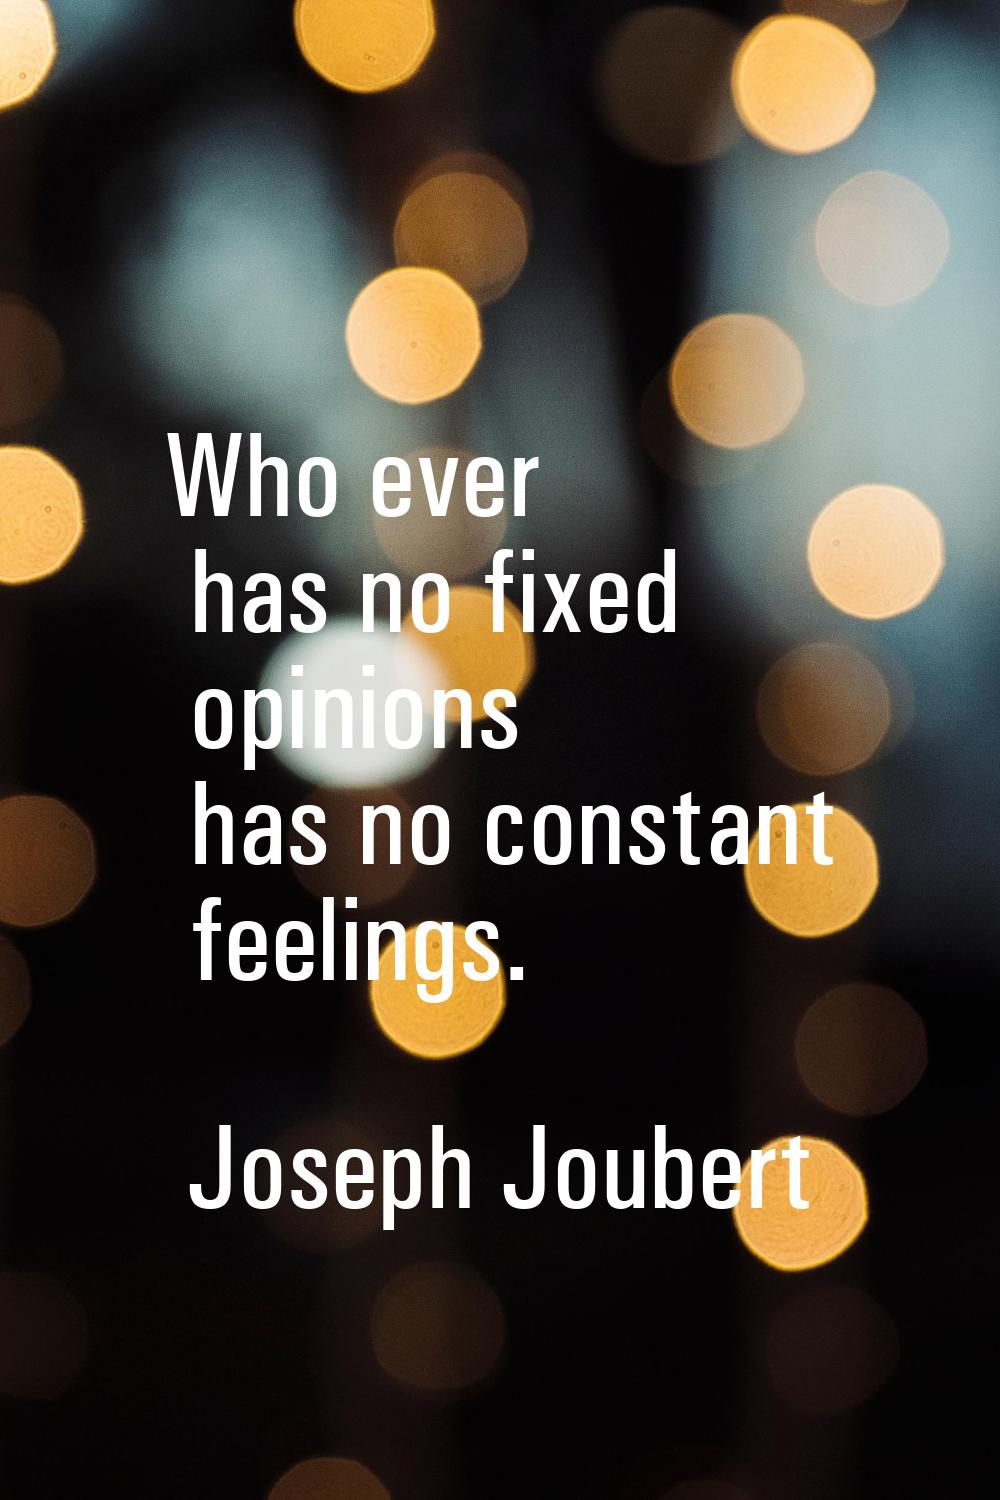 Who ever has no fixed opinions has no constant feelings.